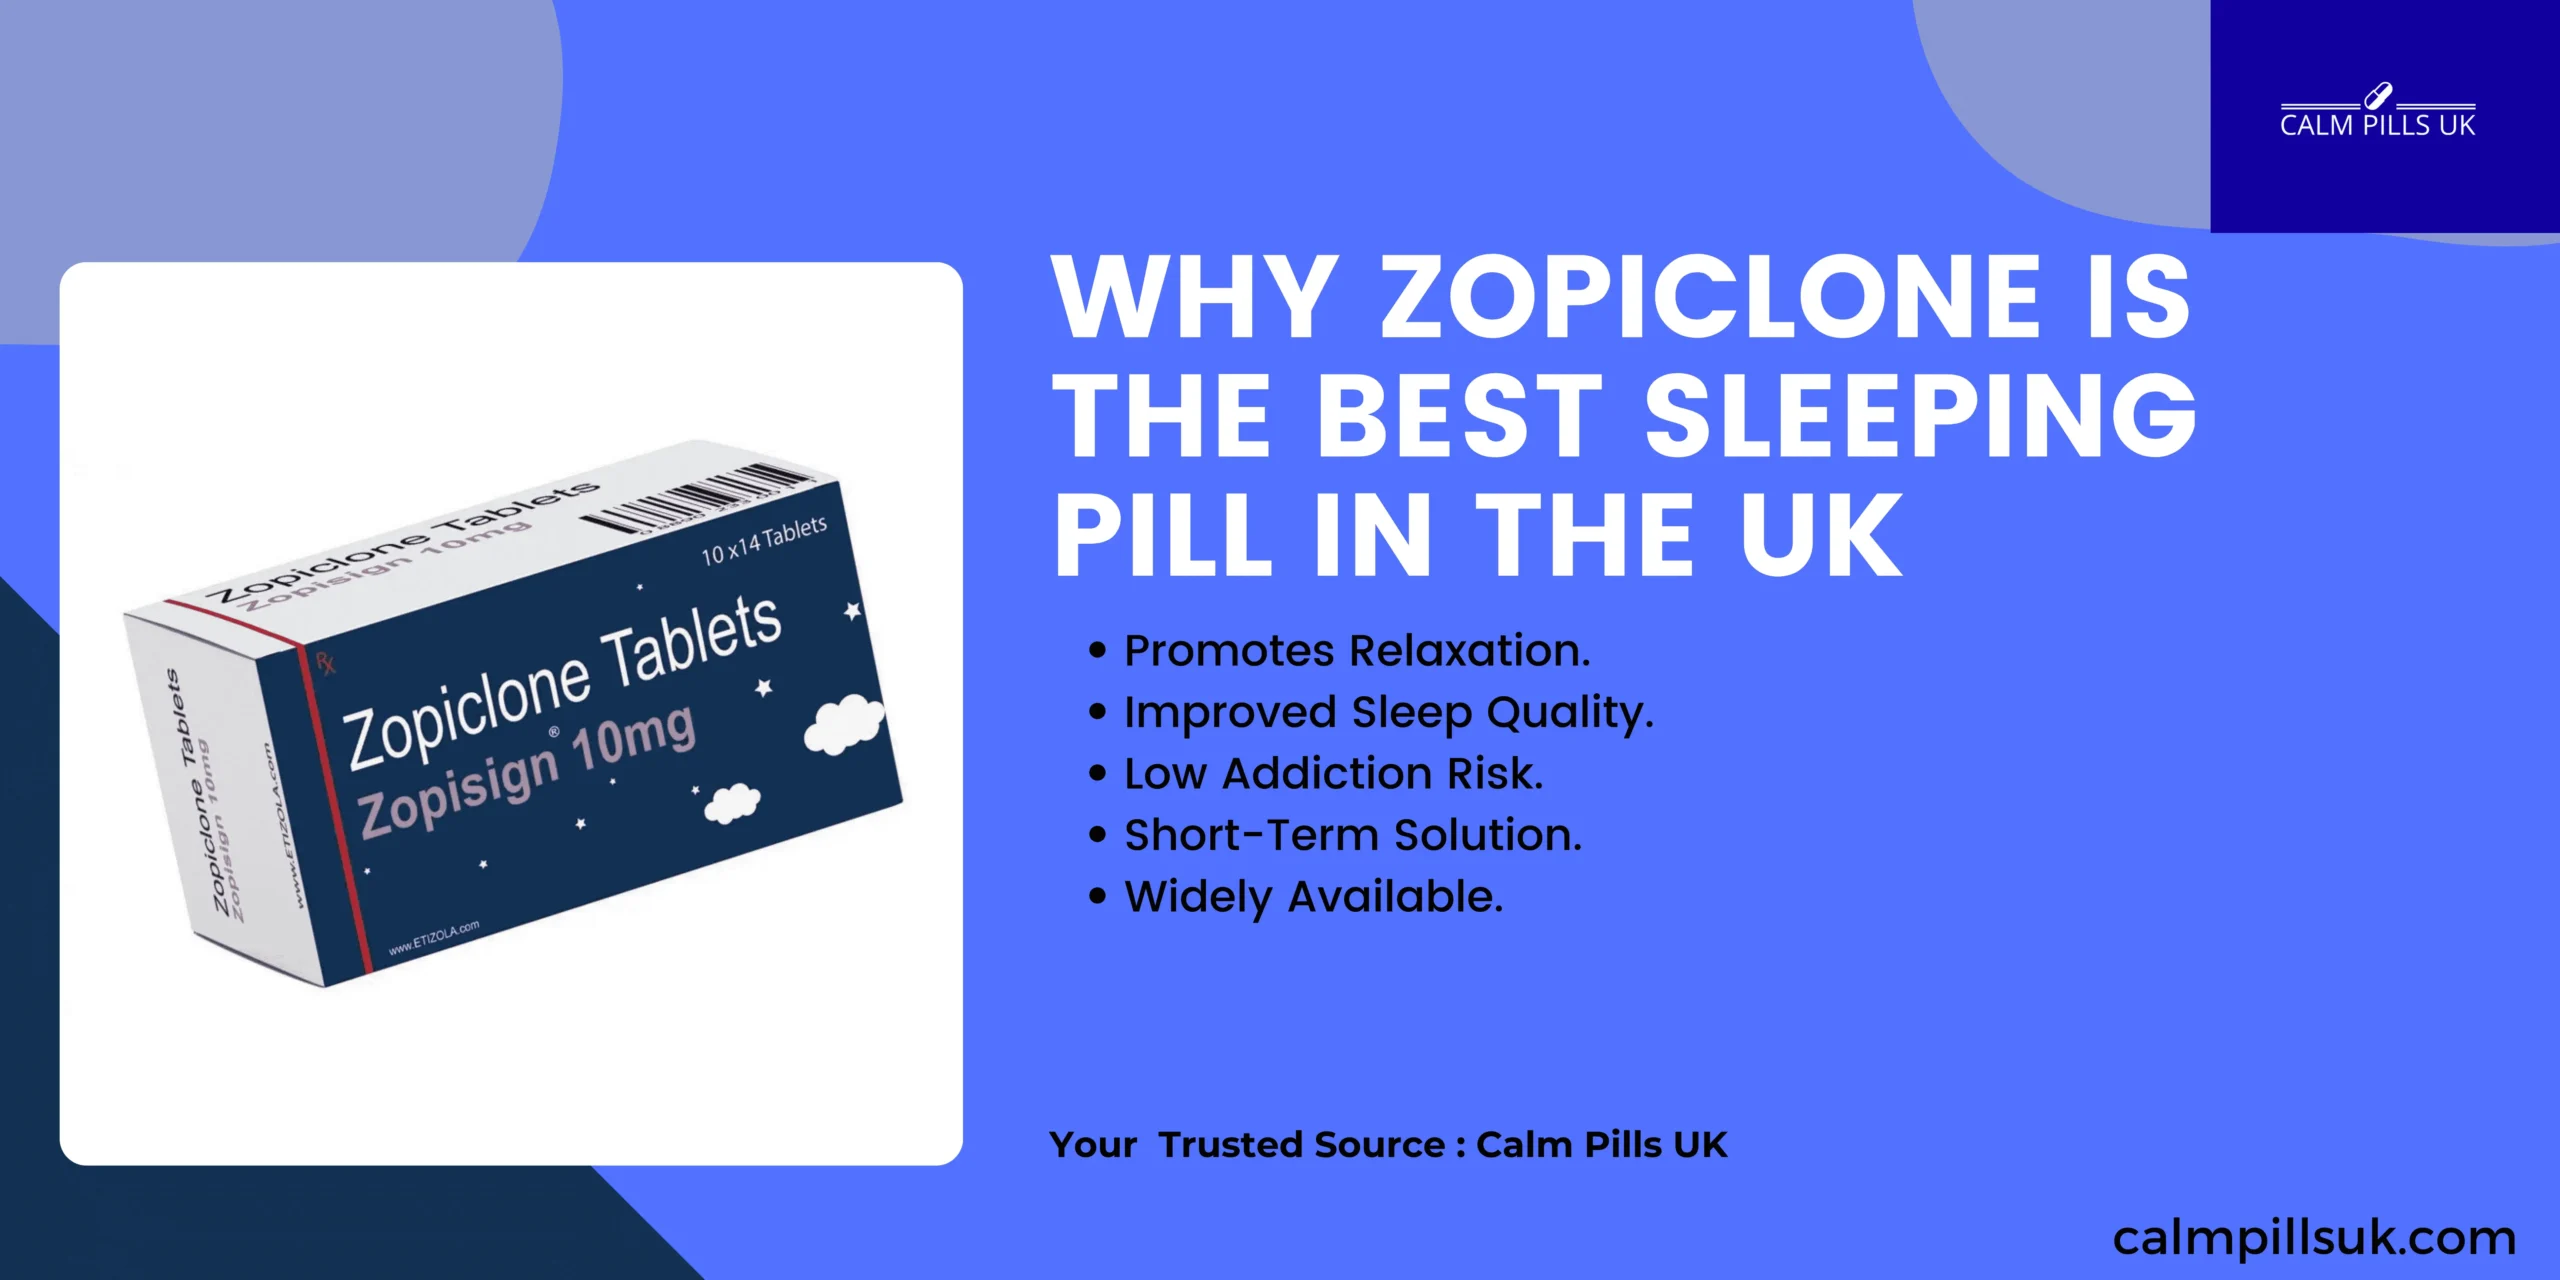 Discover Why Zopiclone is the UK’s Top Sleep Pill